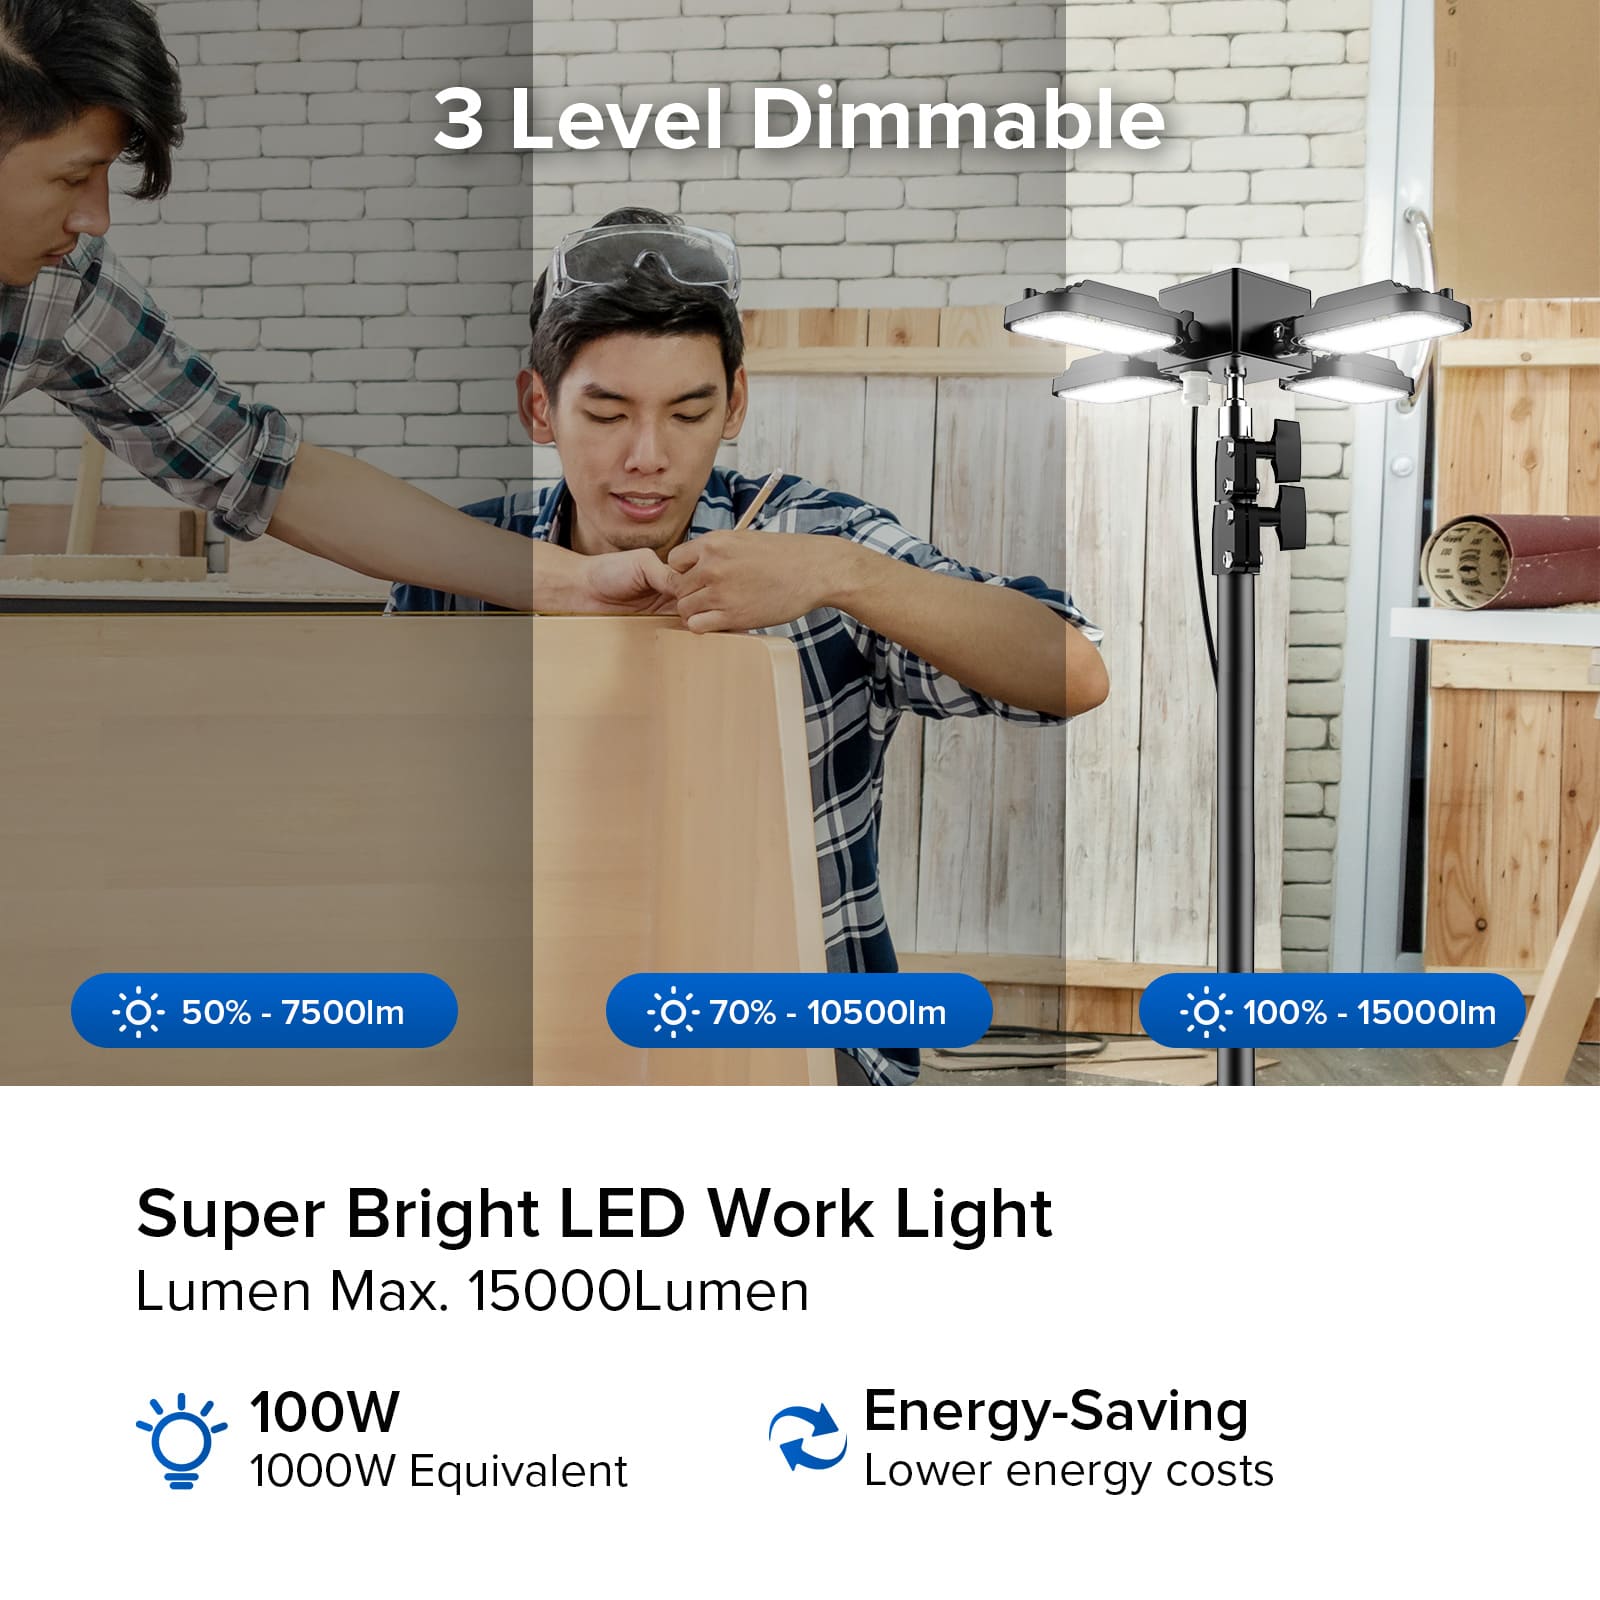 100W Adjustable 4-Head Work Light with Stand, 3 level dimmable, 7500lm, 10500lm, 15000lm.